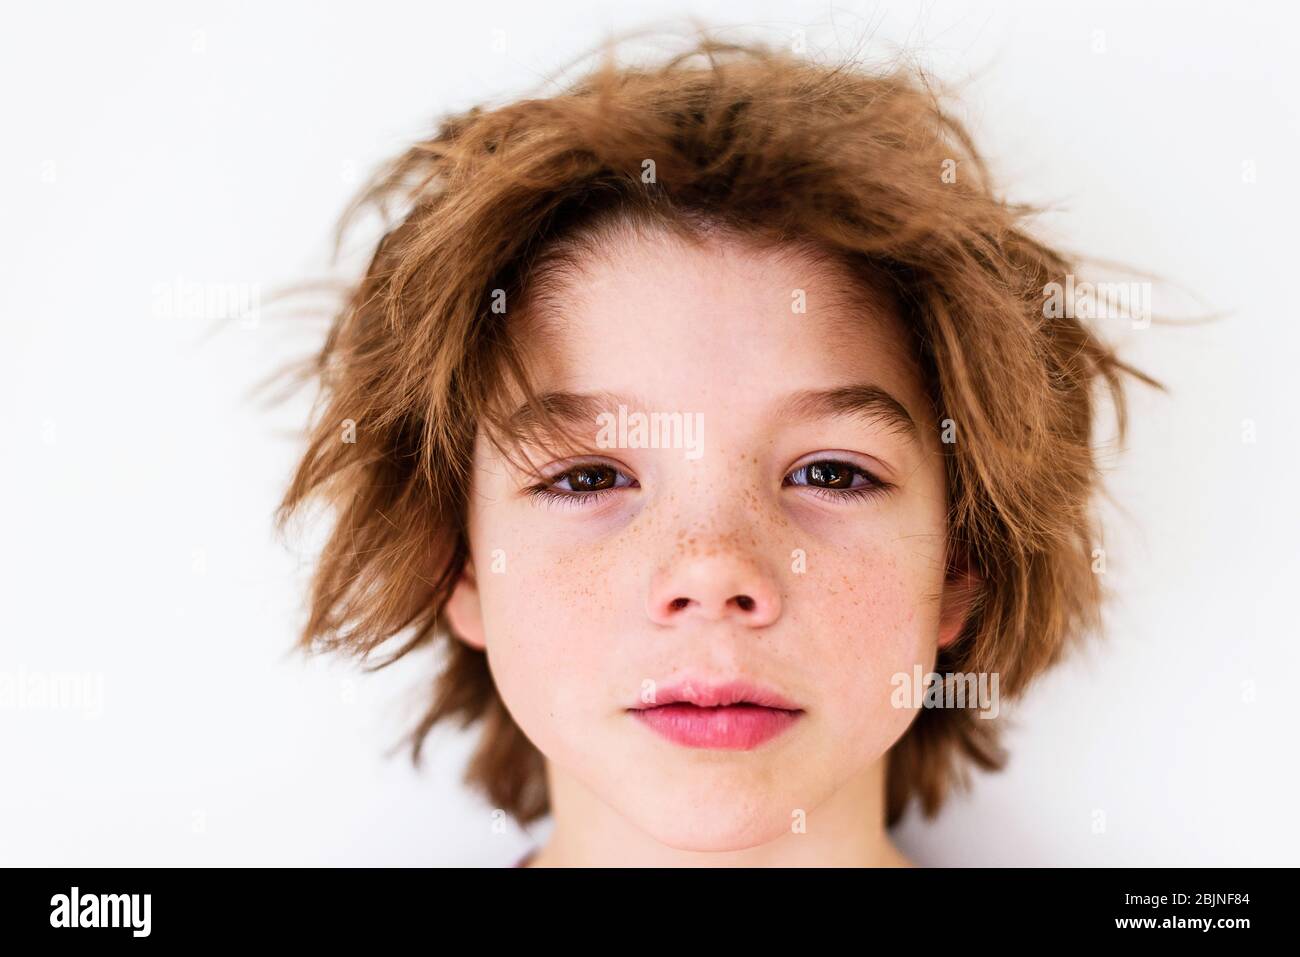 Portrait of a boy with messy hair Stock Photo